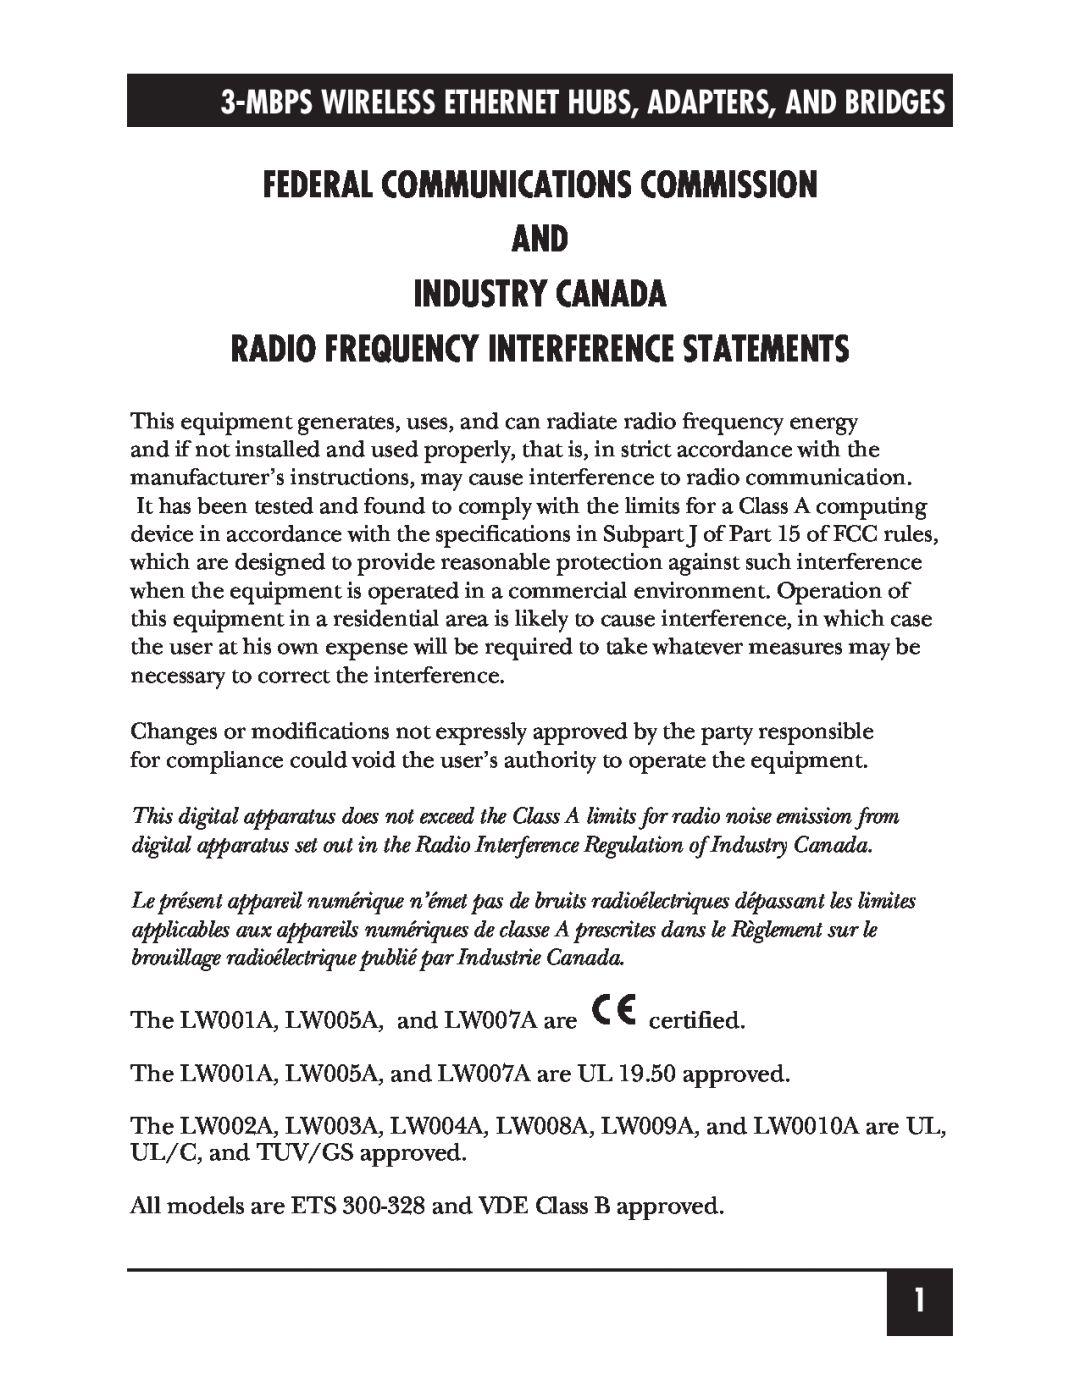 Black Box LW011A, LW012A Federal Communications Commission And Industry Canada, Radio Frequency Interference Statements 